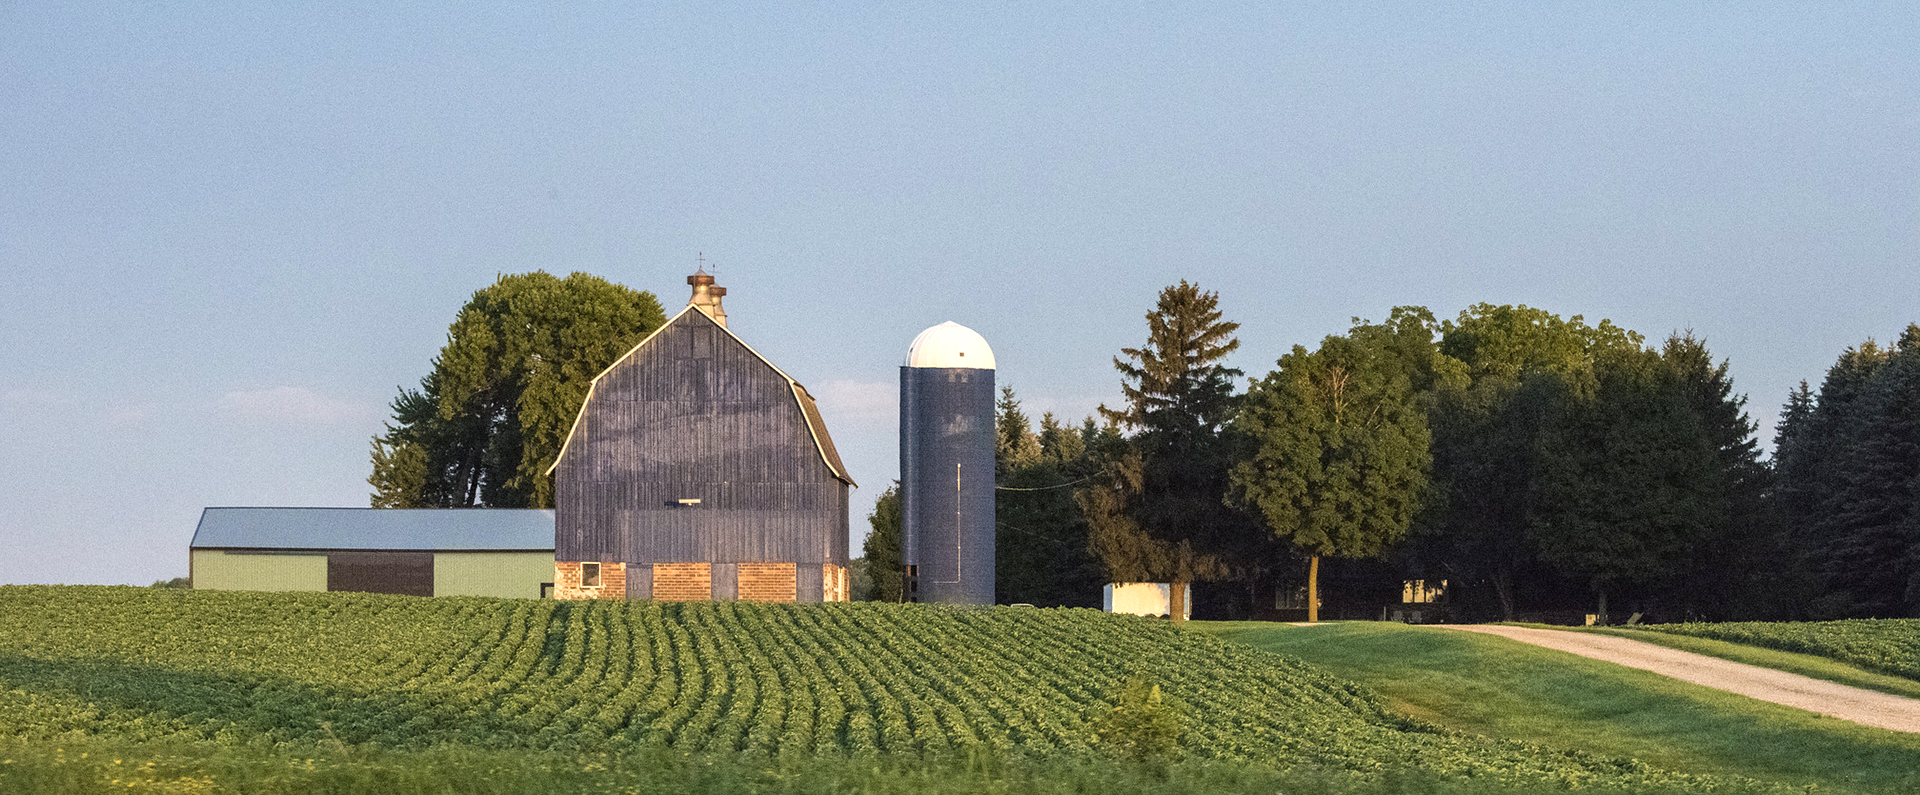 Rows of crops growing in front of a barn and silo.